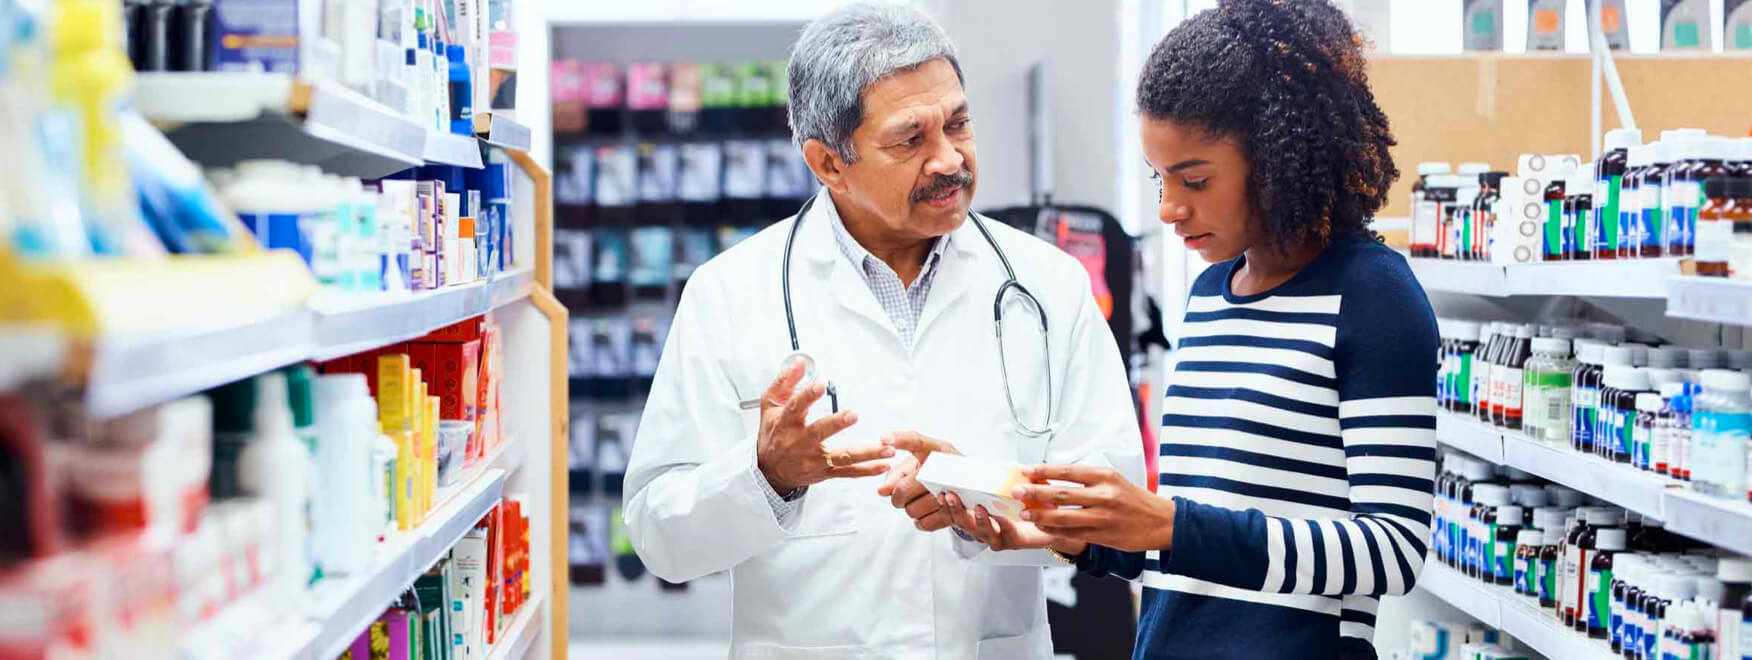 pharmacist talking to patient